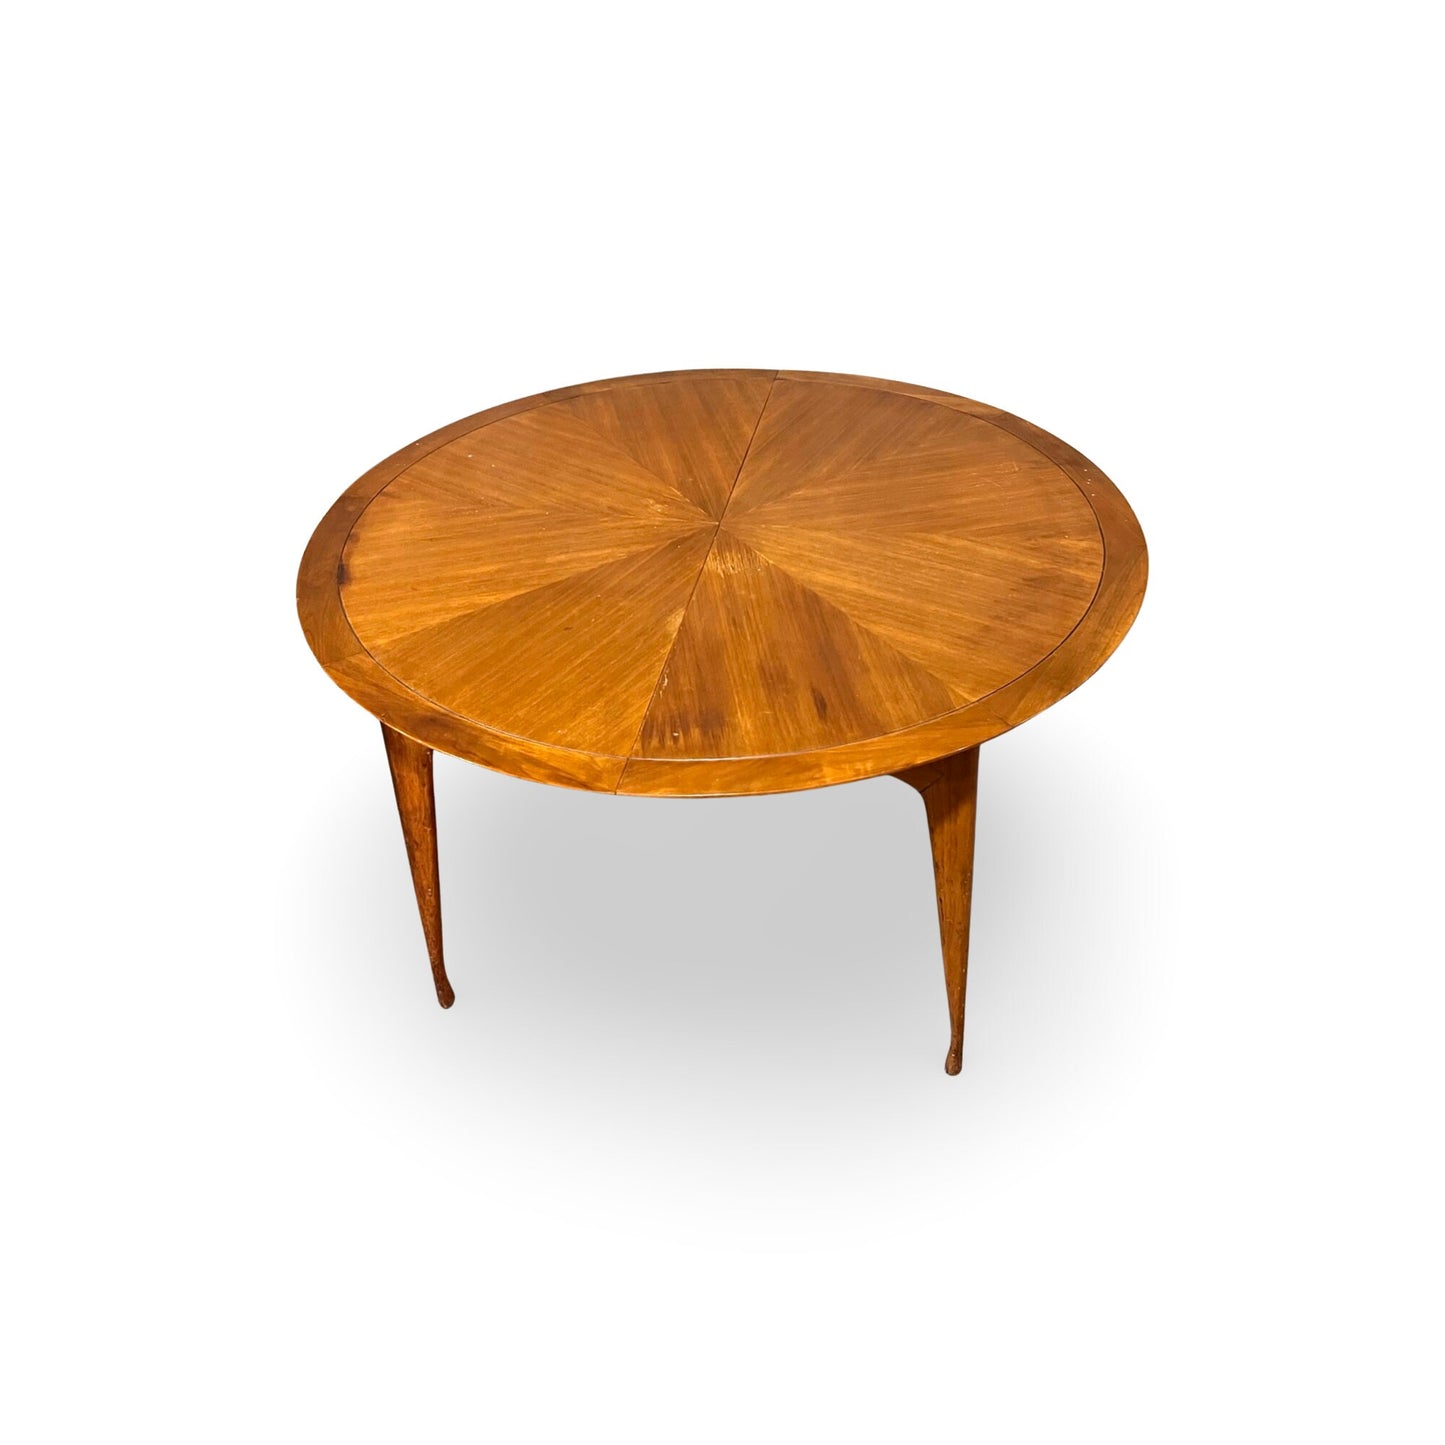 Versatile and artistic dining table, embodying minimalist 1960s design.